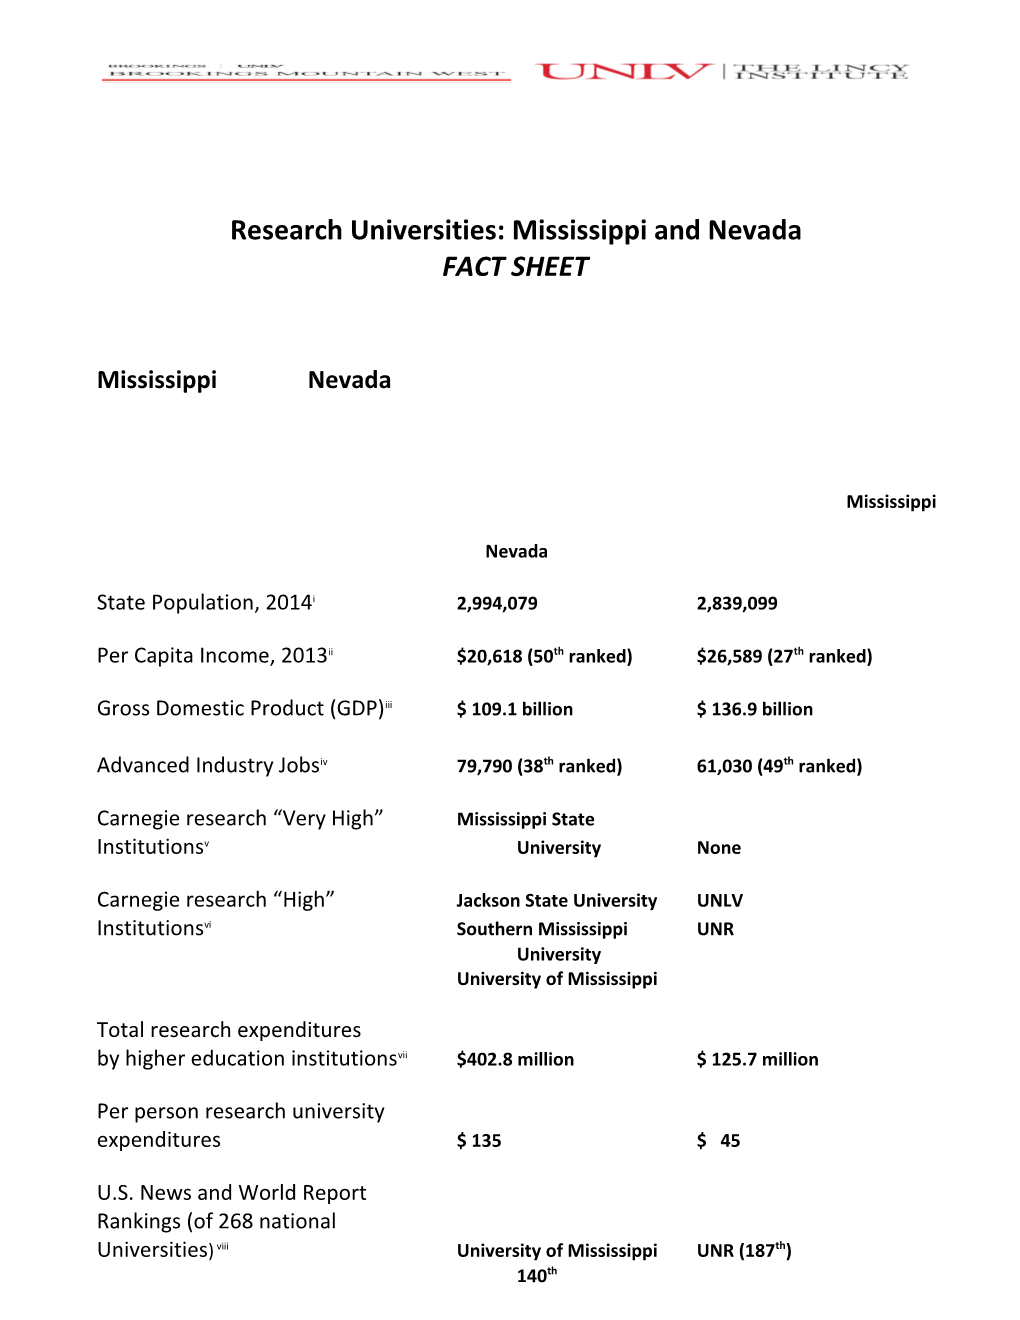 Research Universities: Mississippi and Nevada